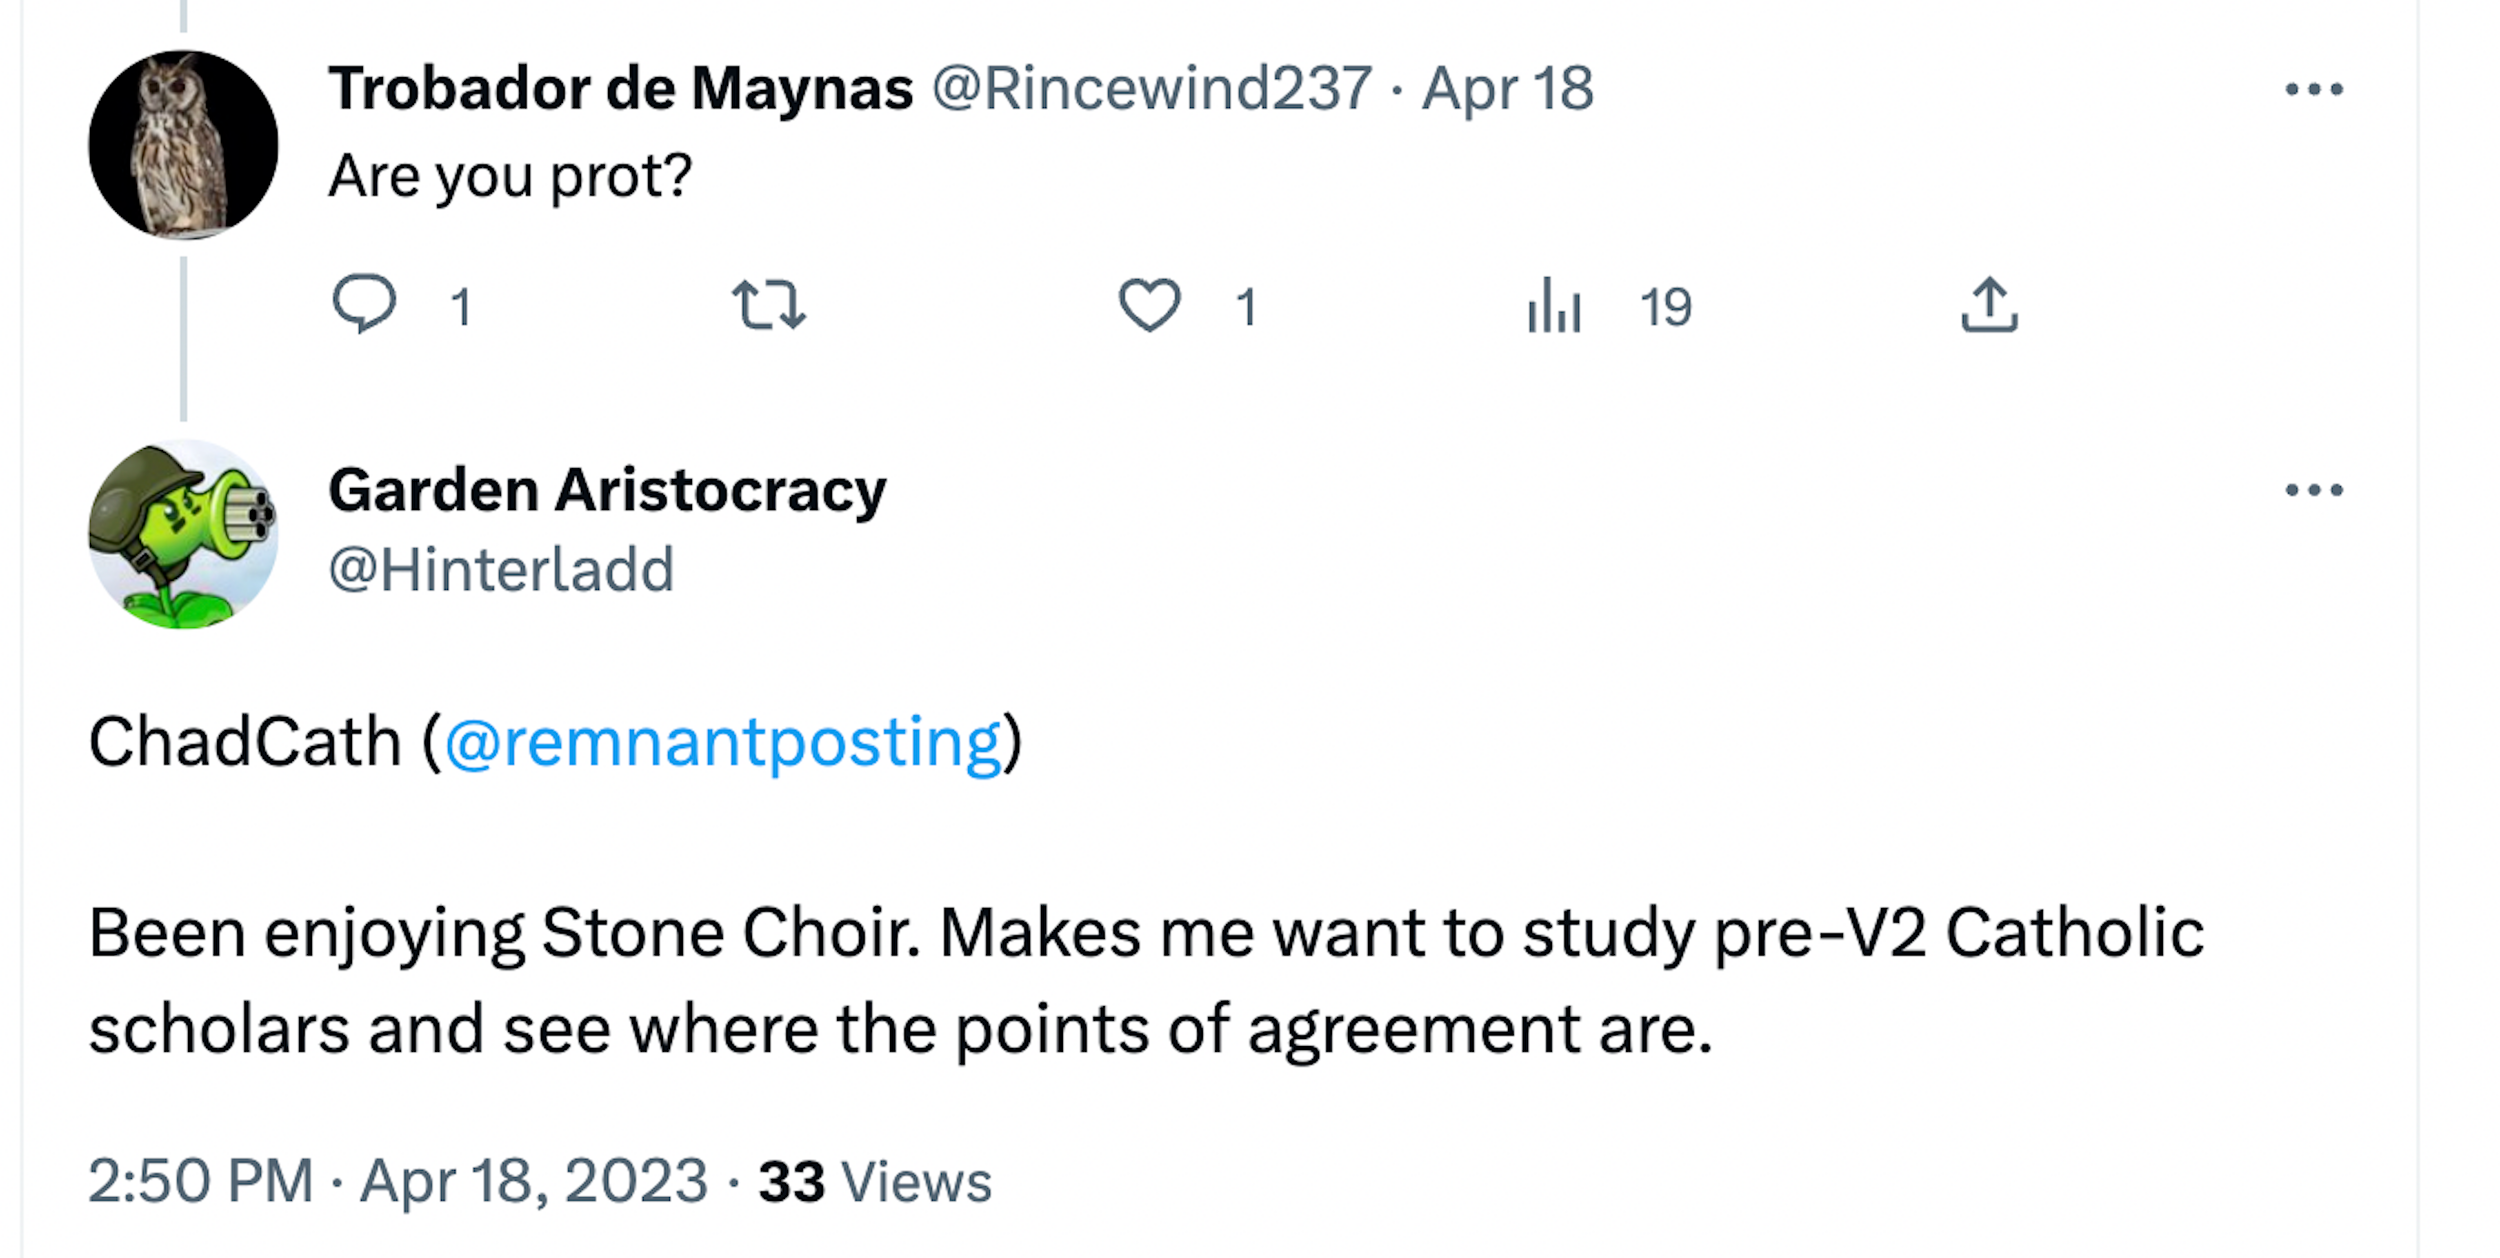 Twitter exchange between "Trobador de Maynas" and "Garden Aristocracy." Trobador asks if Garden is "prot." Garden responds, "ChadCath" and then says "Been enjoying Stone Choir. Makes me want to study pre-V2 catholic scholars and see what the points of agreement are."